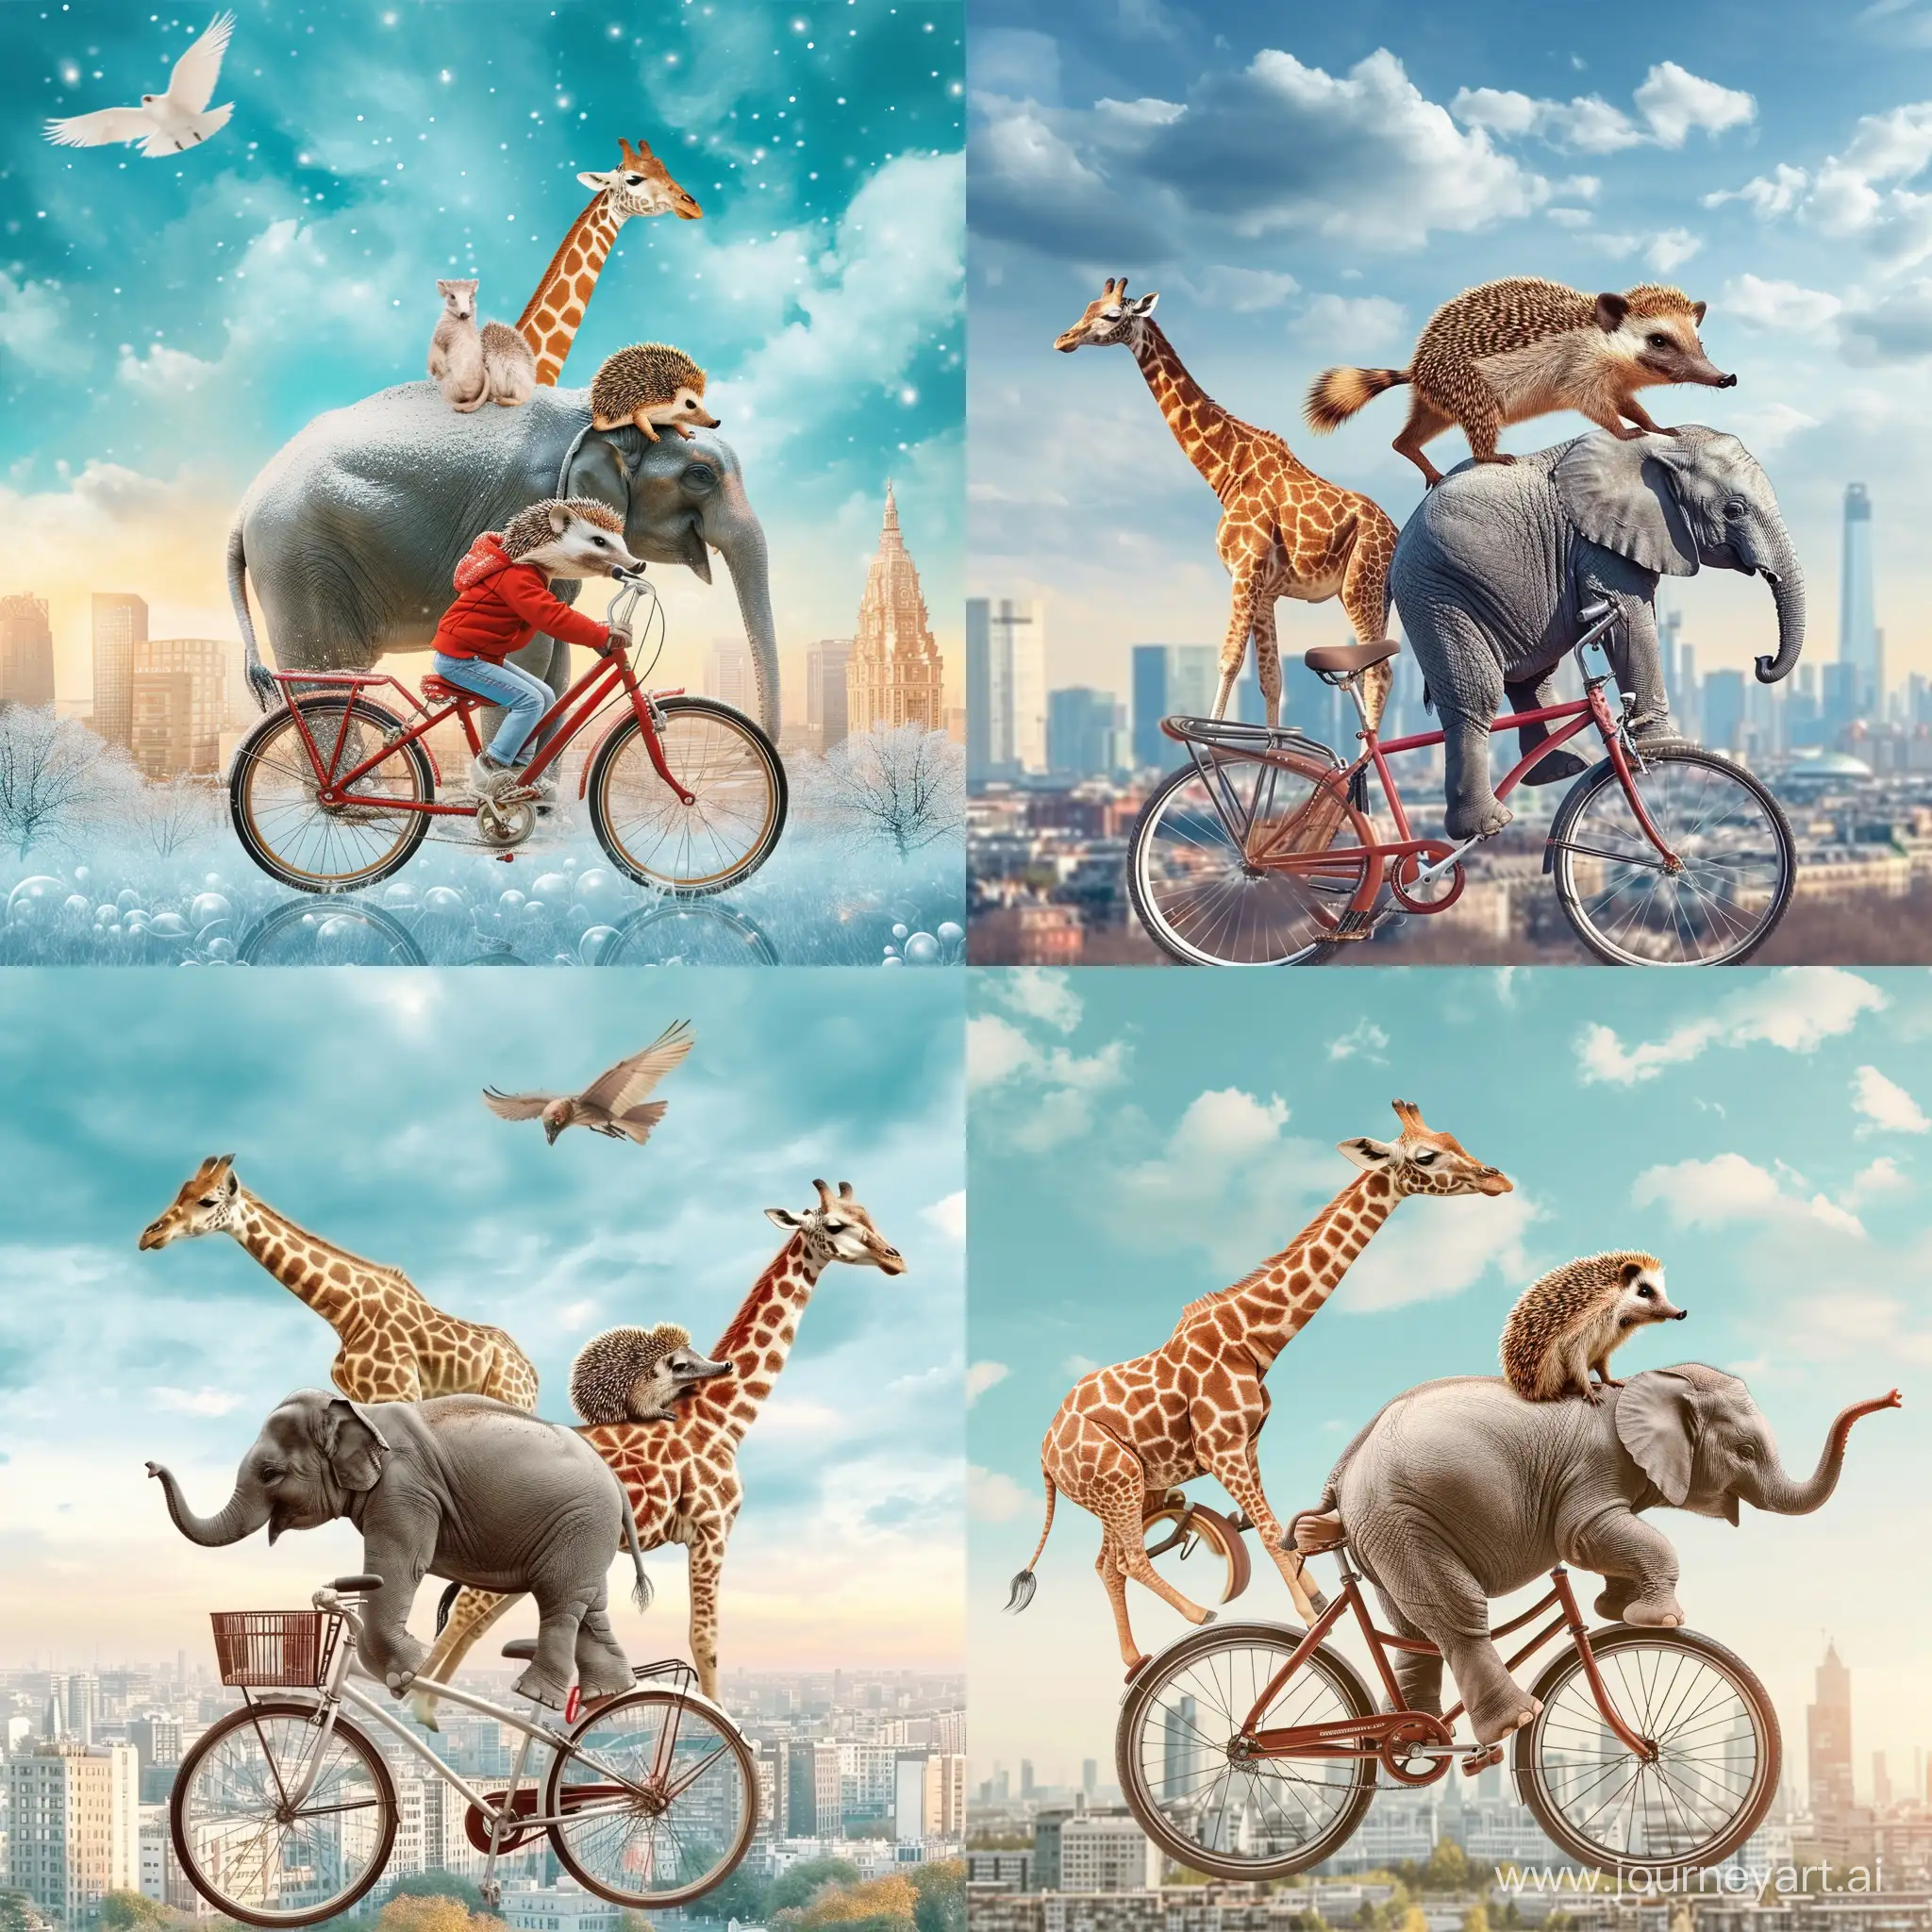 children's picture animals, elephant, giraffe, hedgehog on a bicycle against the background of the city and the sky for digital printing wallpaper, custom design wallpaper